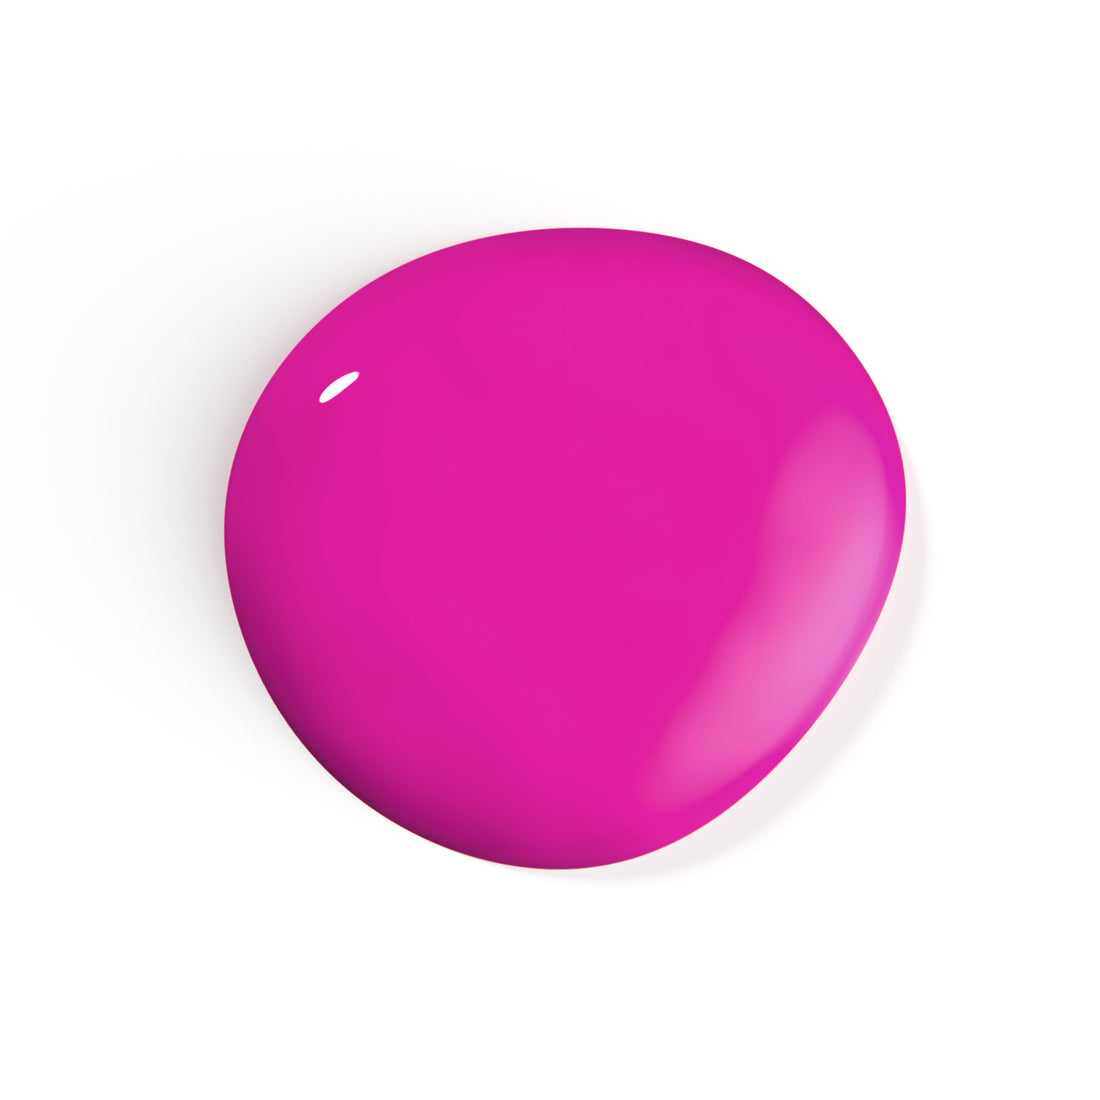 A droplet of Liberation Nails vegan nail polish in a neon pink color, Chroma.